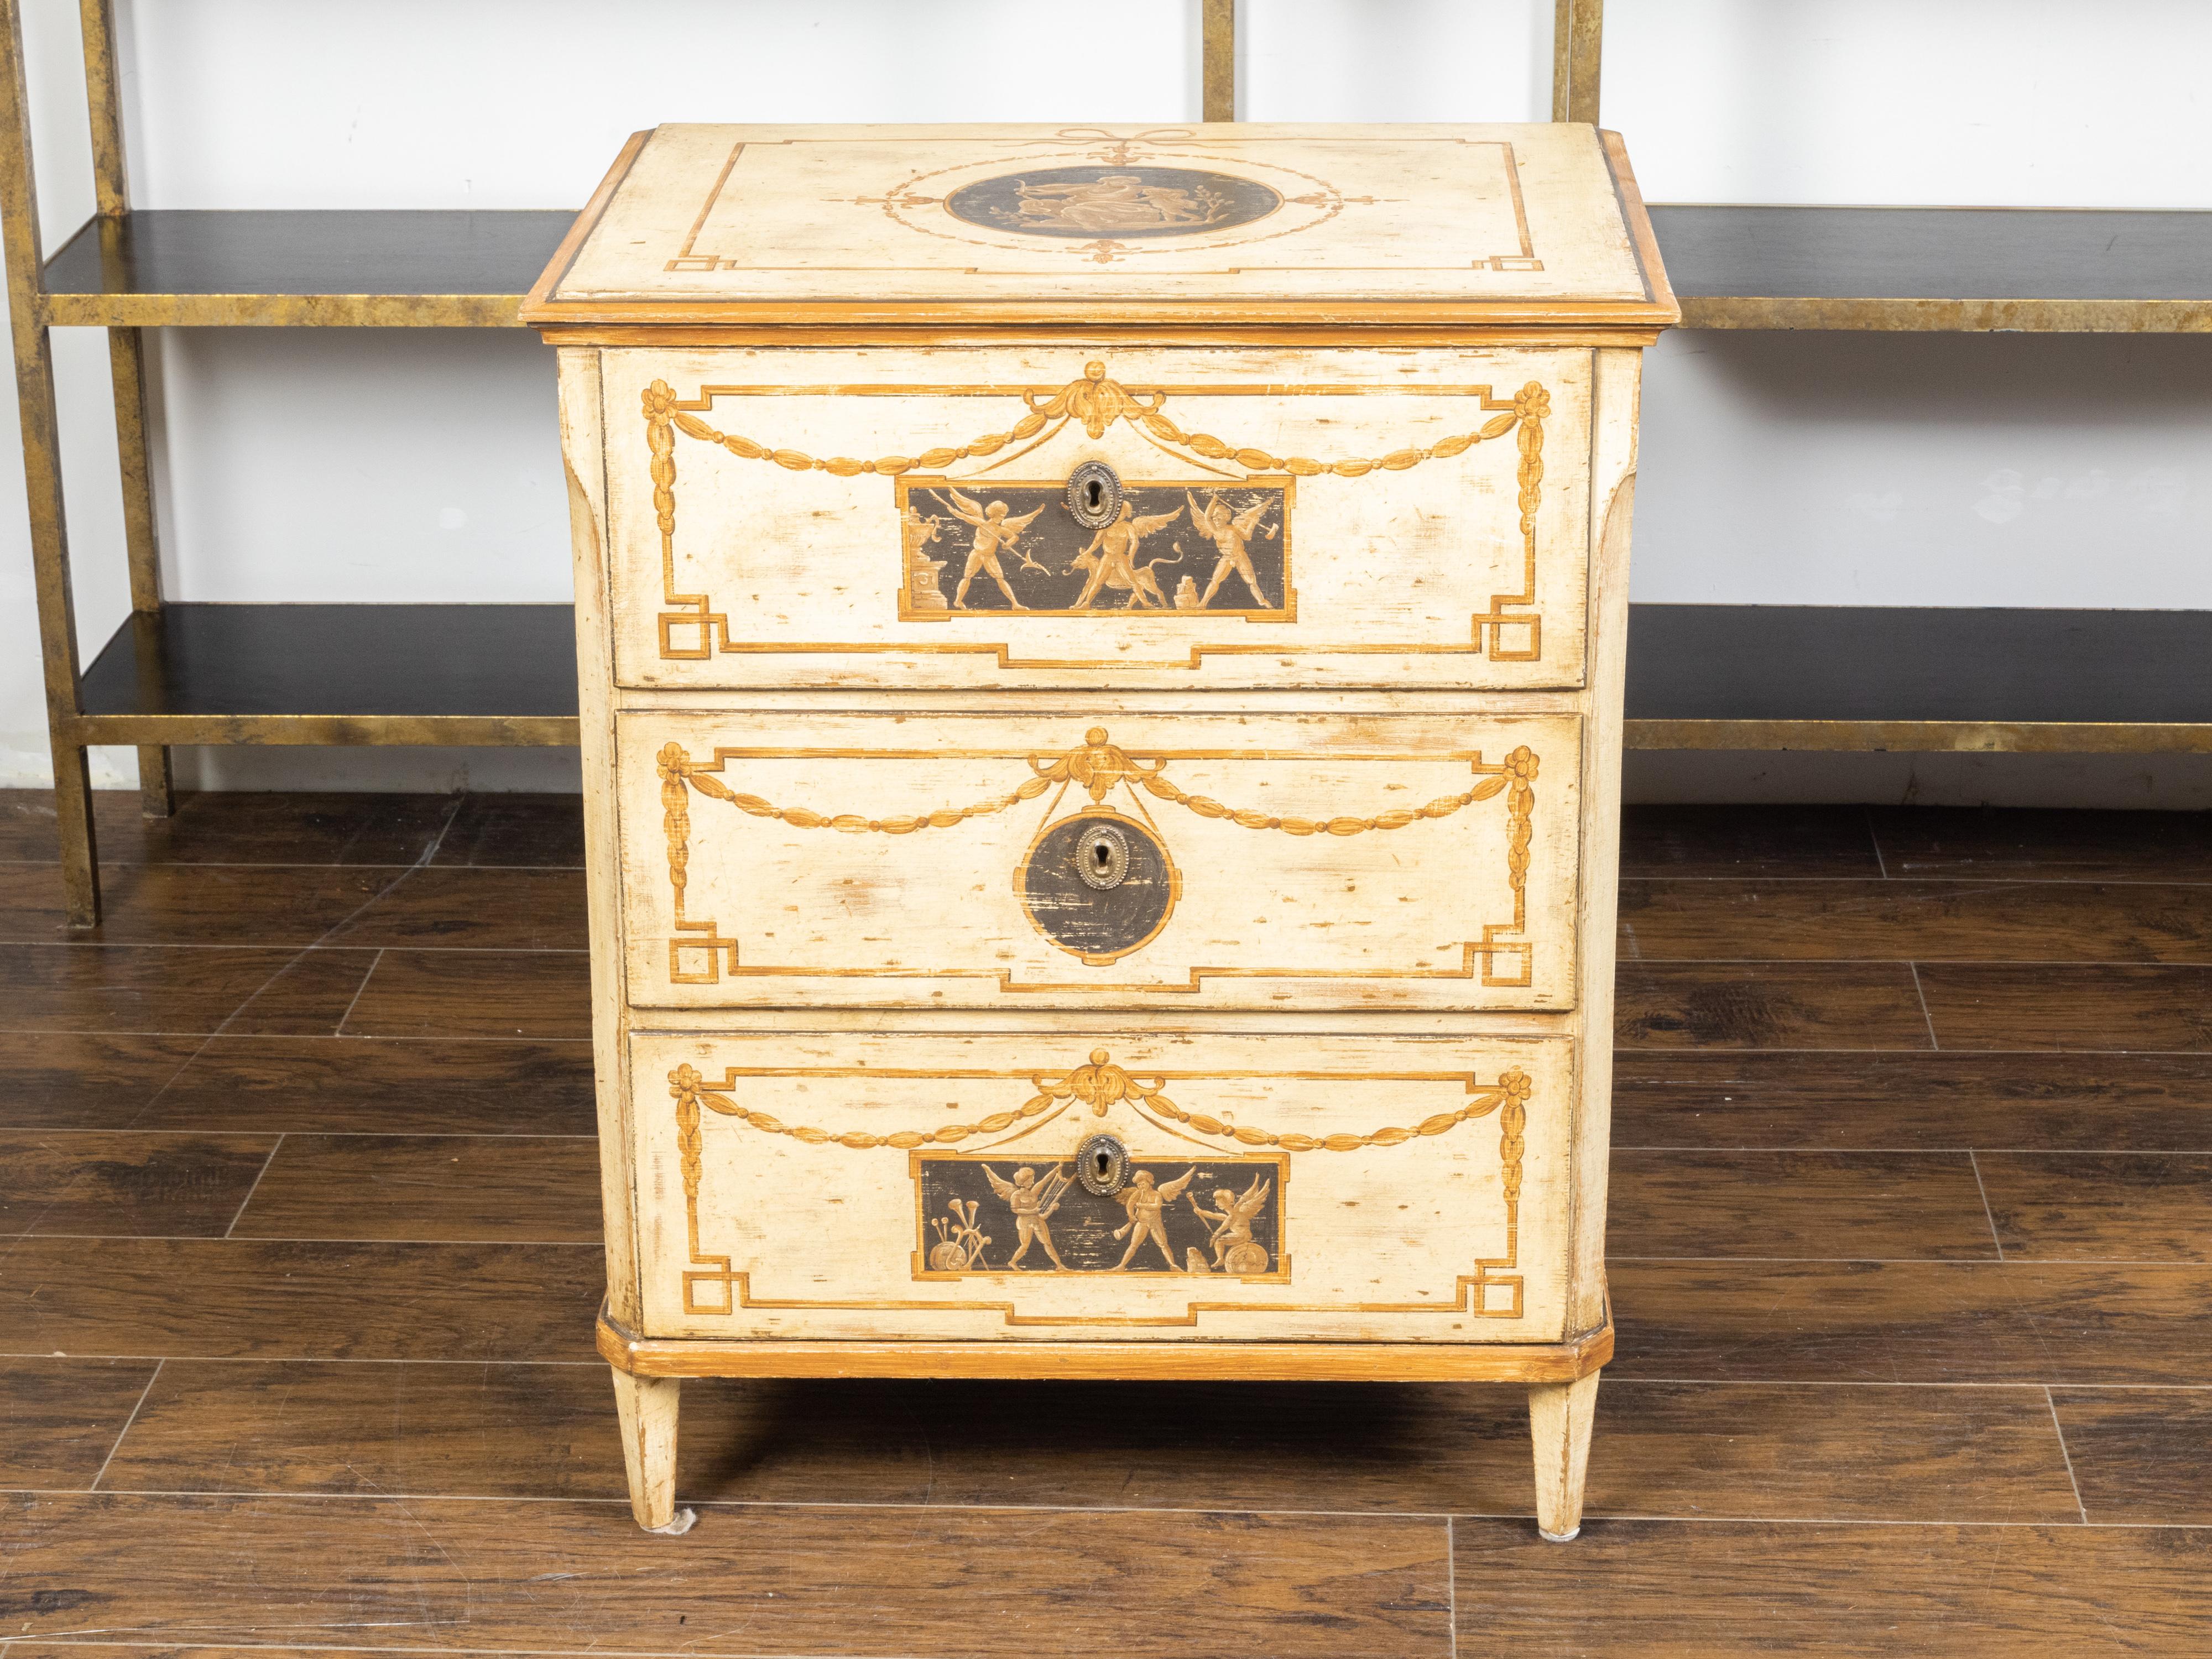 An Italian neoclassical style painted wood three drawer commode from the 19th century, with mythological scenes. Created in Italy during the 19th century, this neoclassical commode draws our attention with its nicely weathered painted finish